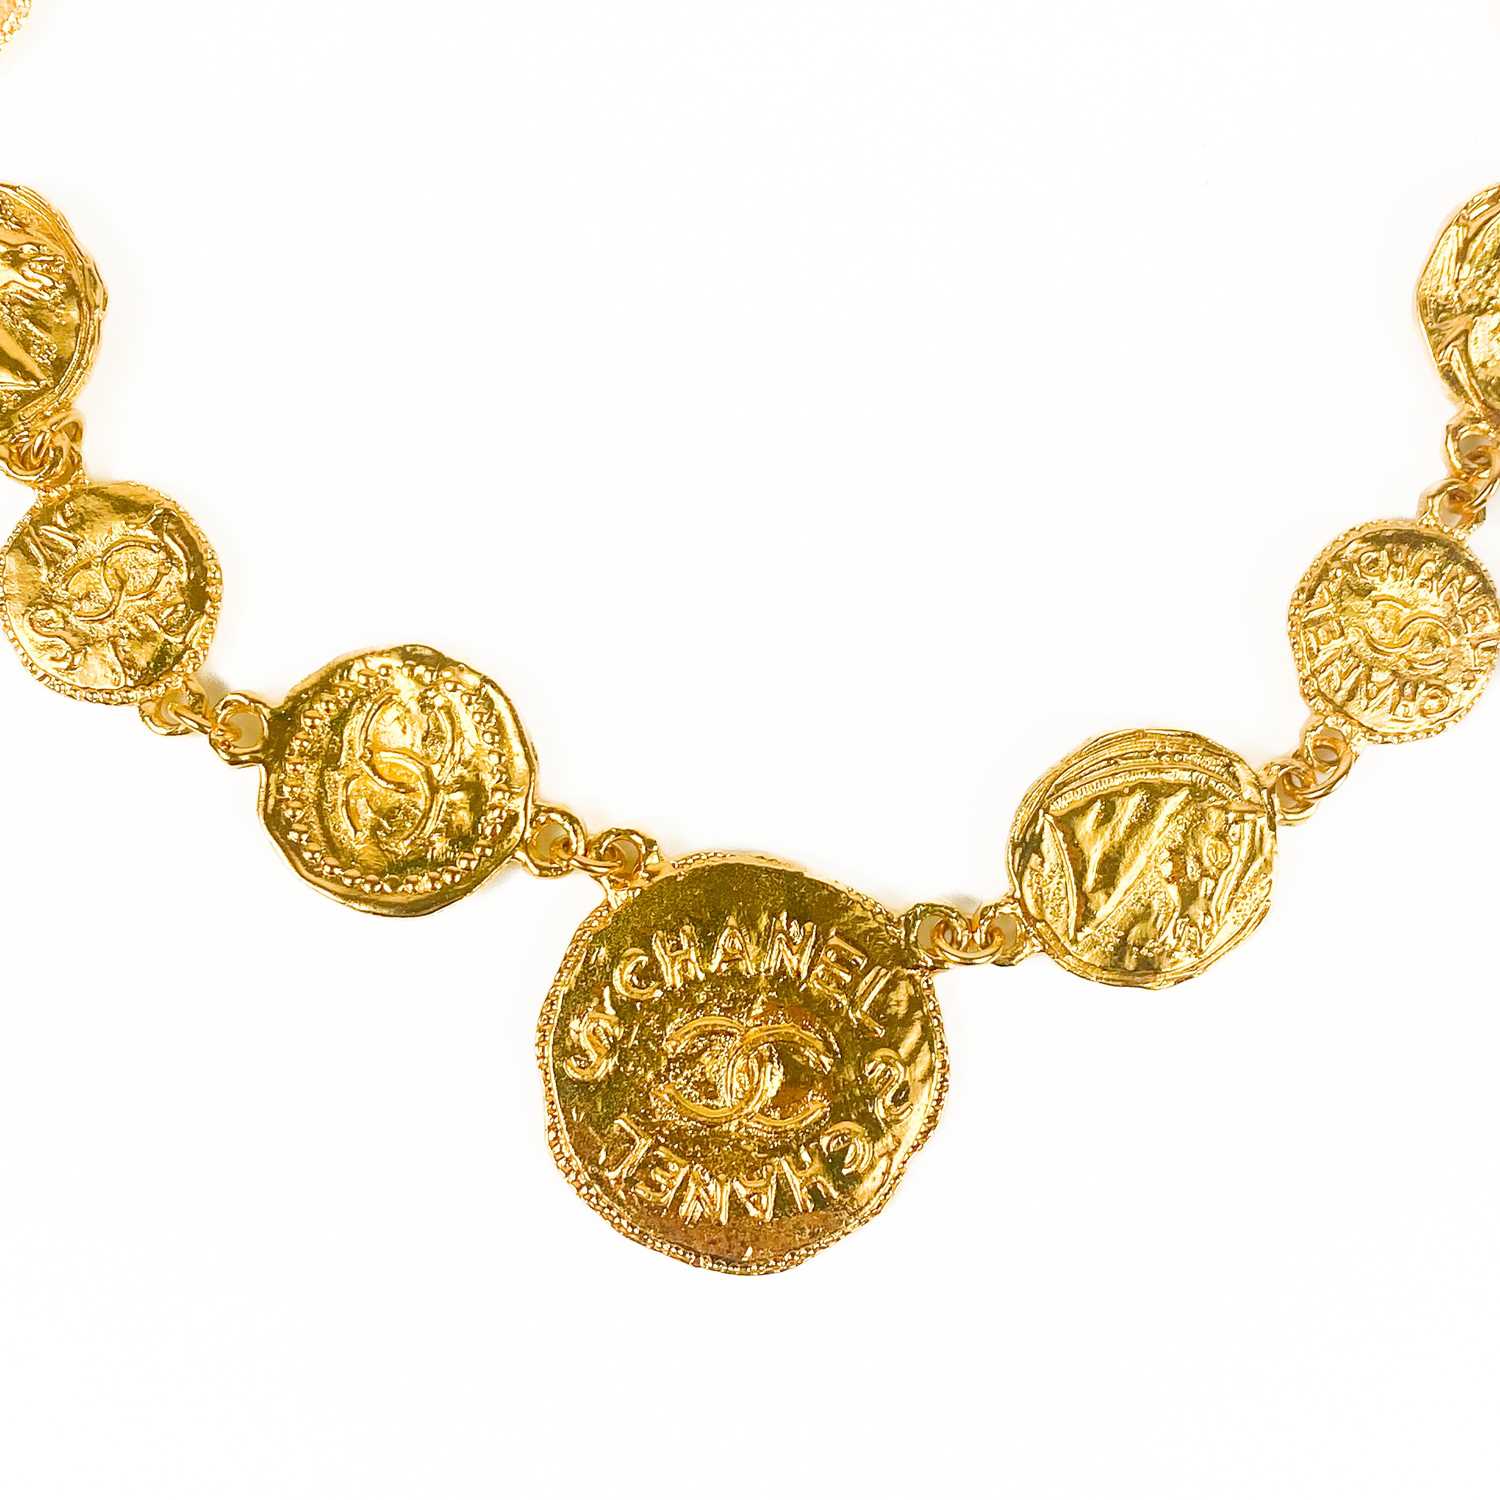 A Chanel 1980's CC medallion choker necklace. - Image 4 of 5